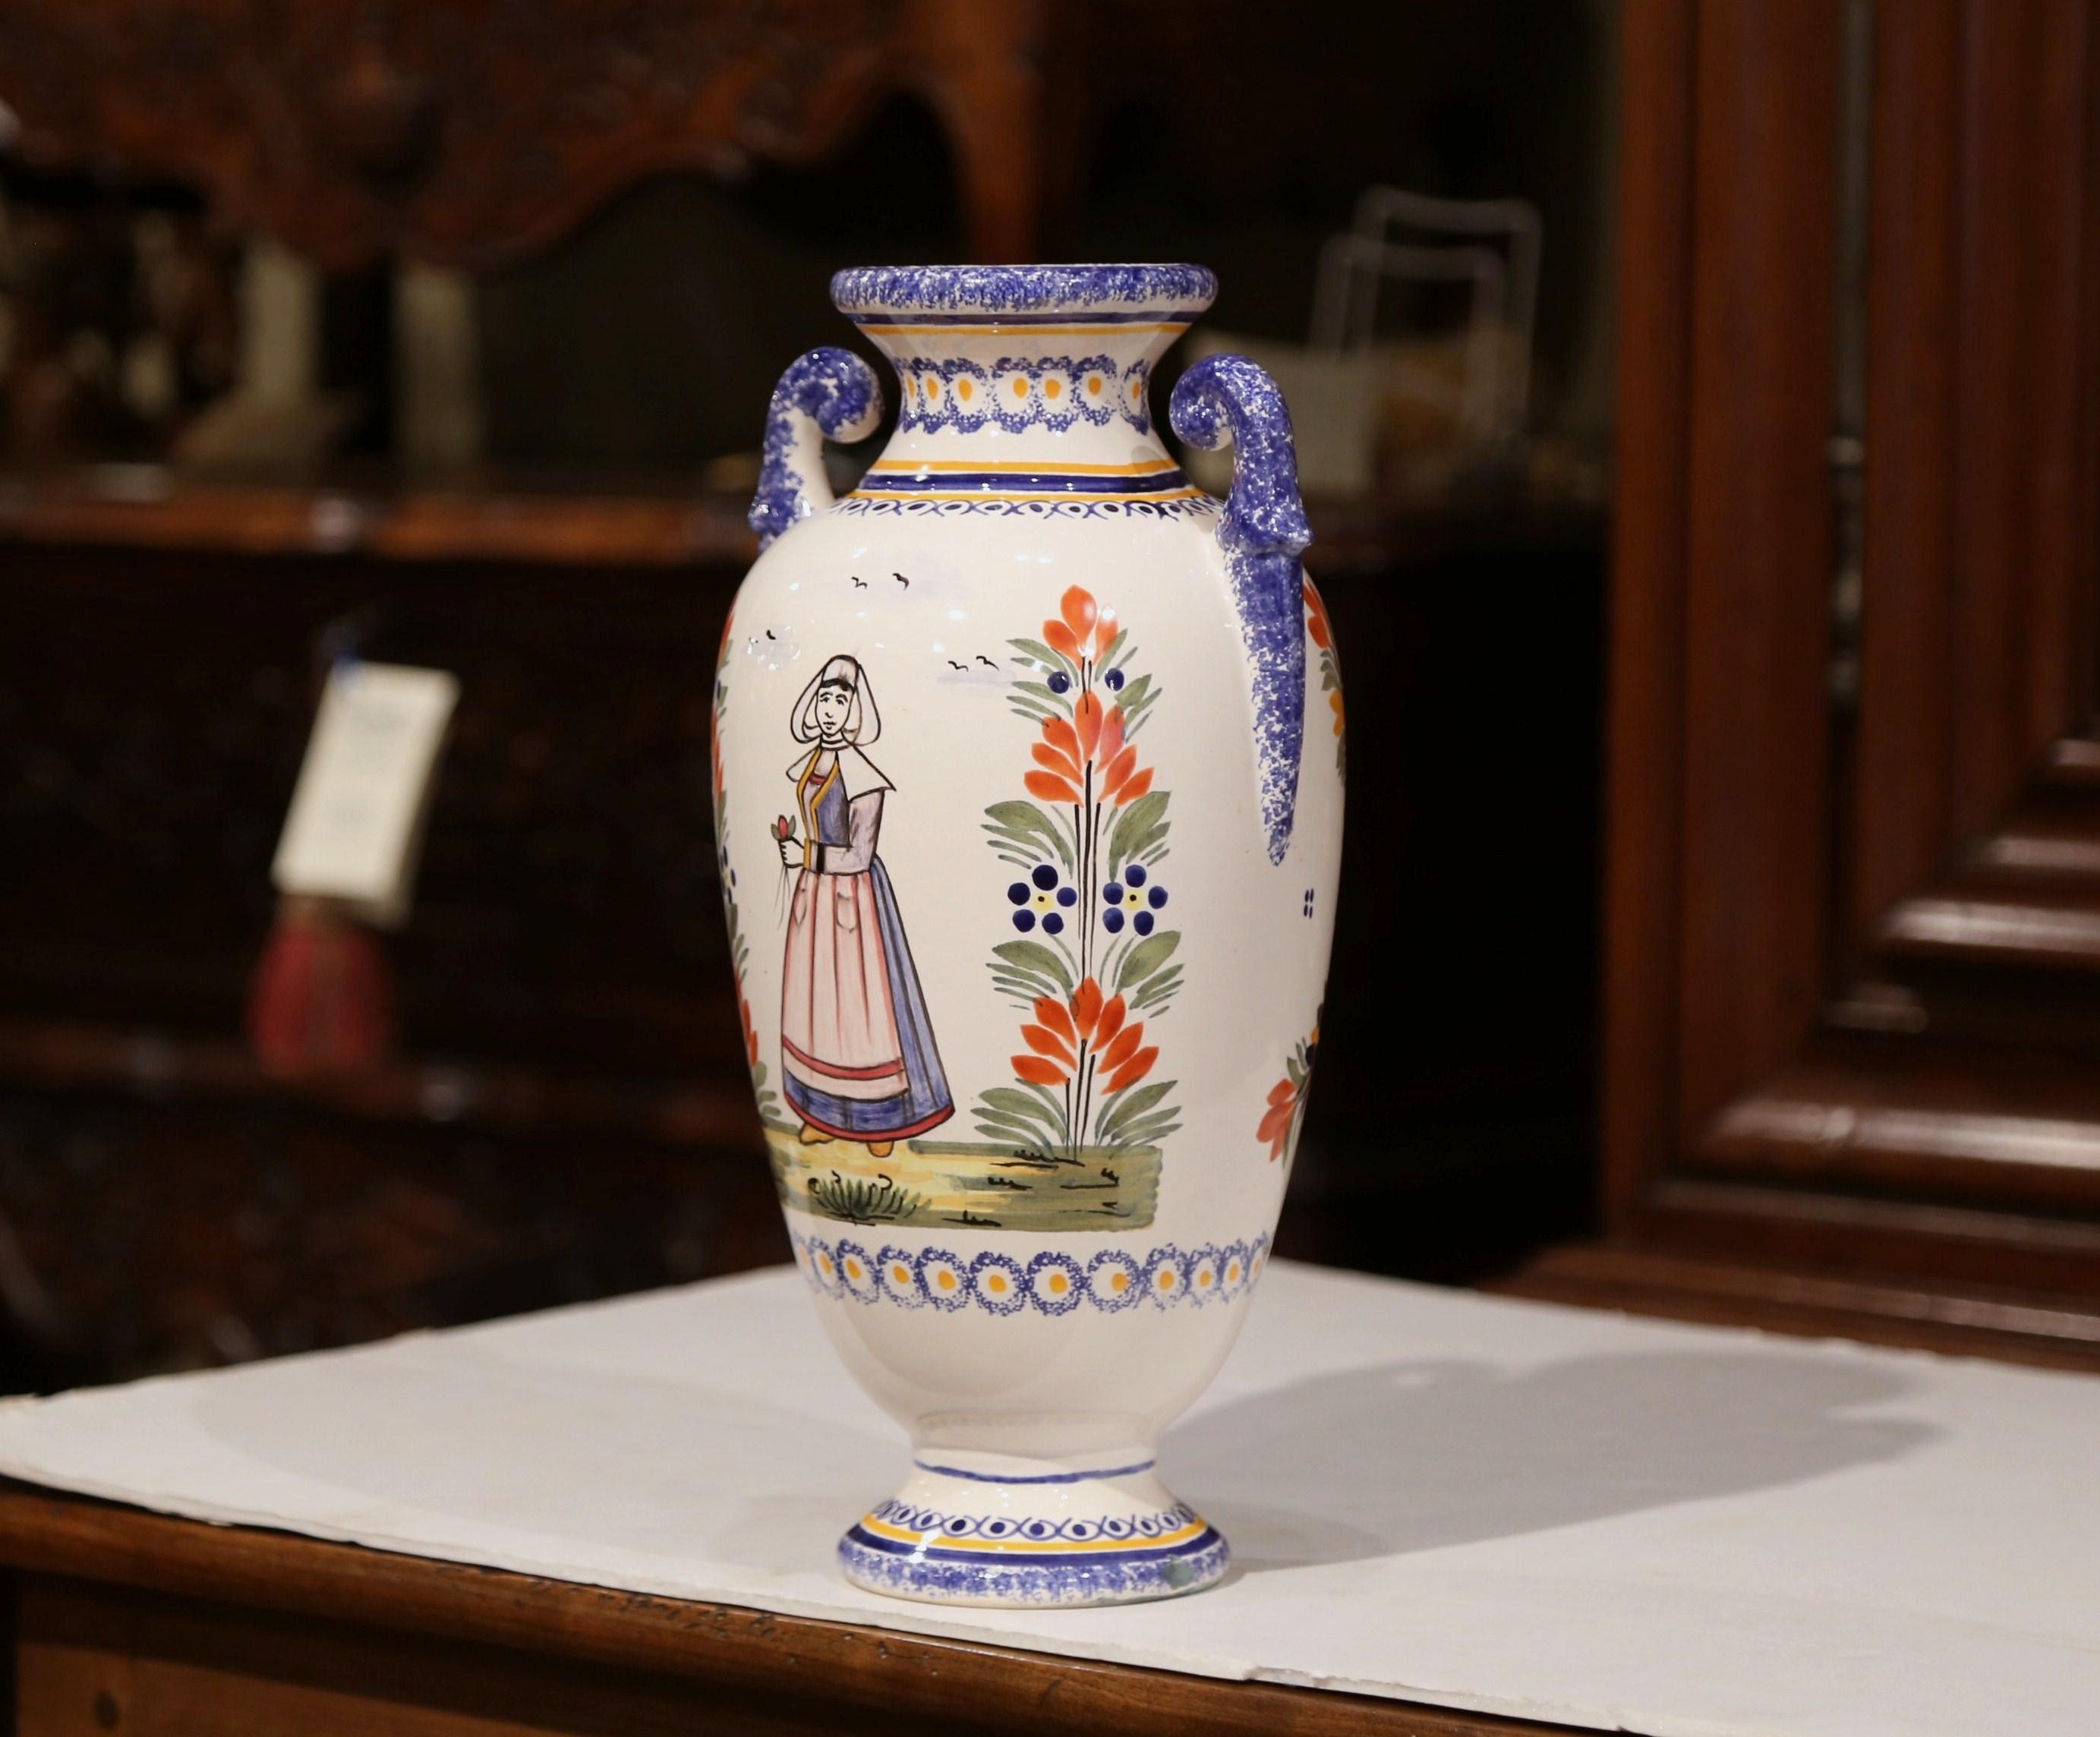 This antique ceramic vase was created in Brittany, circa 1920. Round in shape, the faience piece has curved handles and features colorful hand painted decor. The painted elements include a Breton woman dressed in traditional, historically accurate